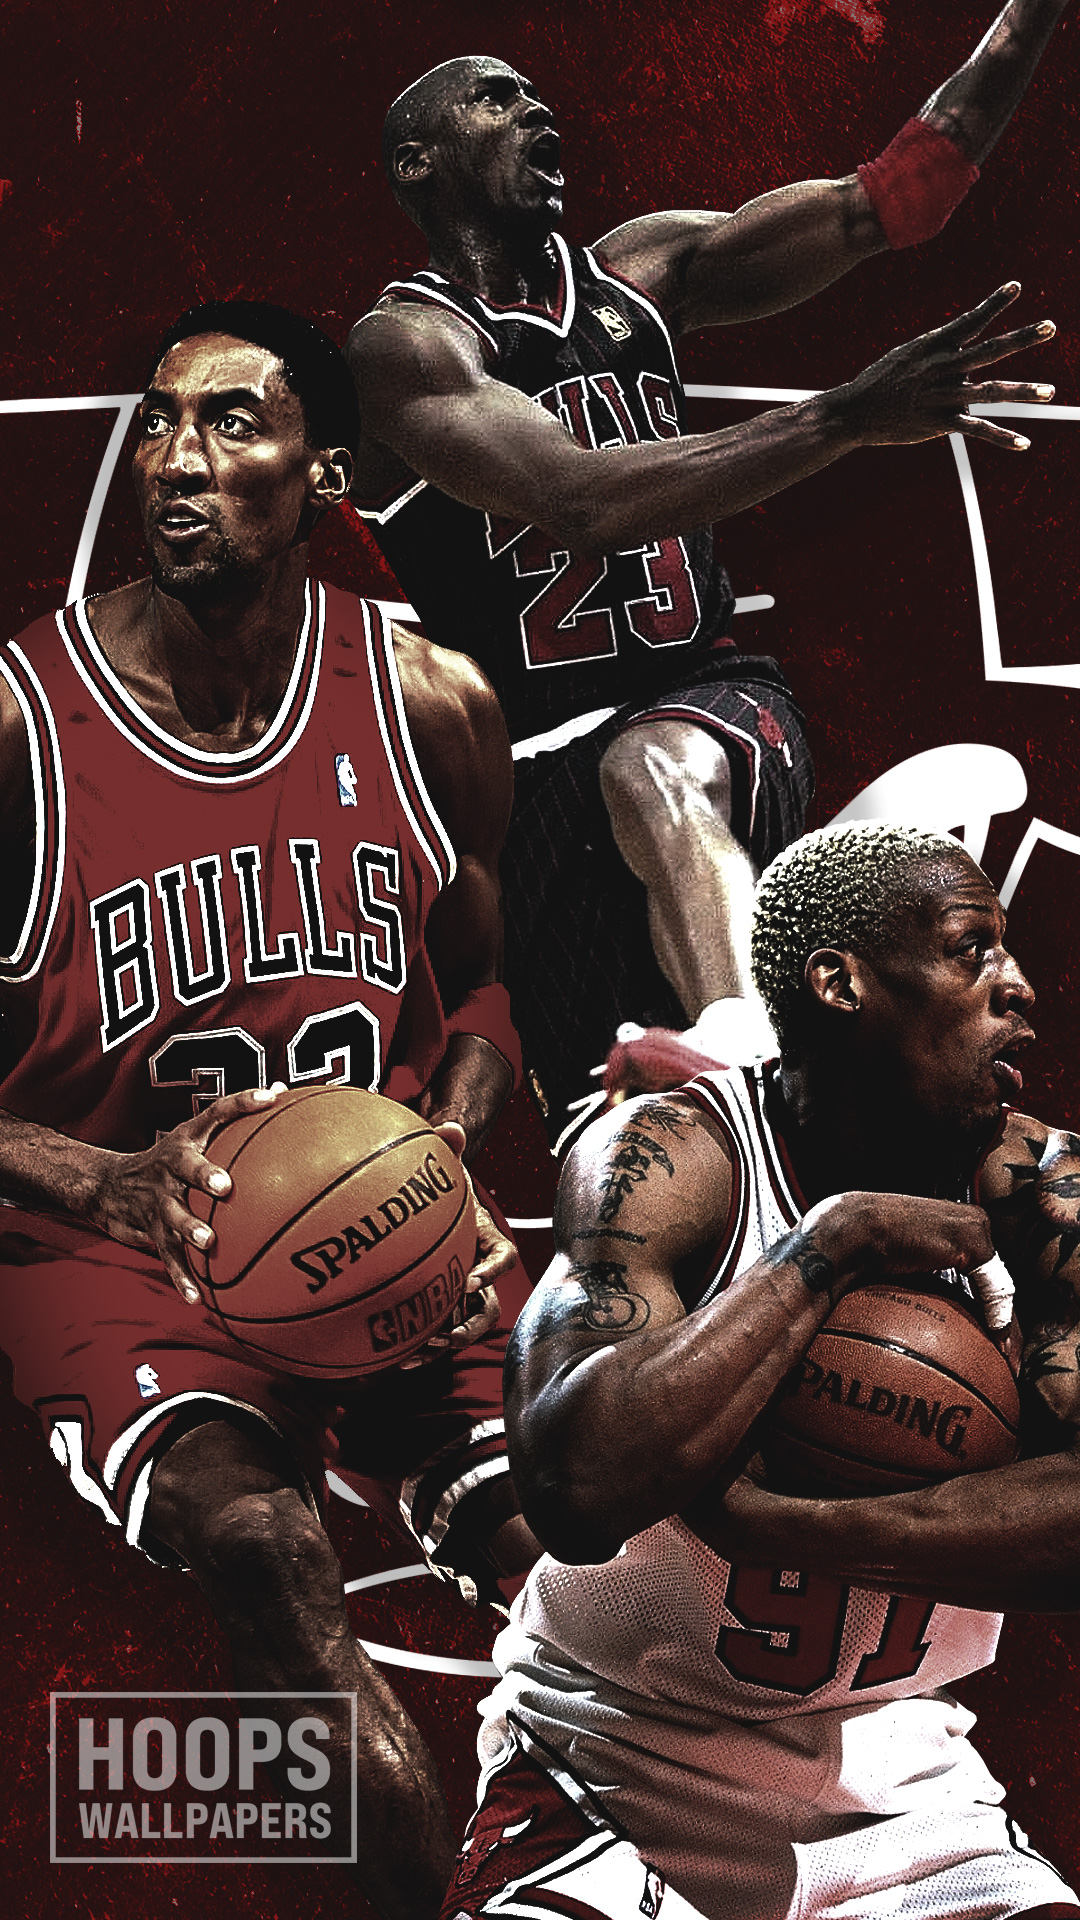 HoopsWallpapers.com – Get the latest HD and mobile NBA wallpapers today